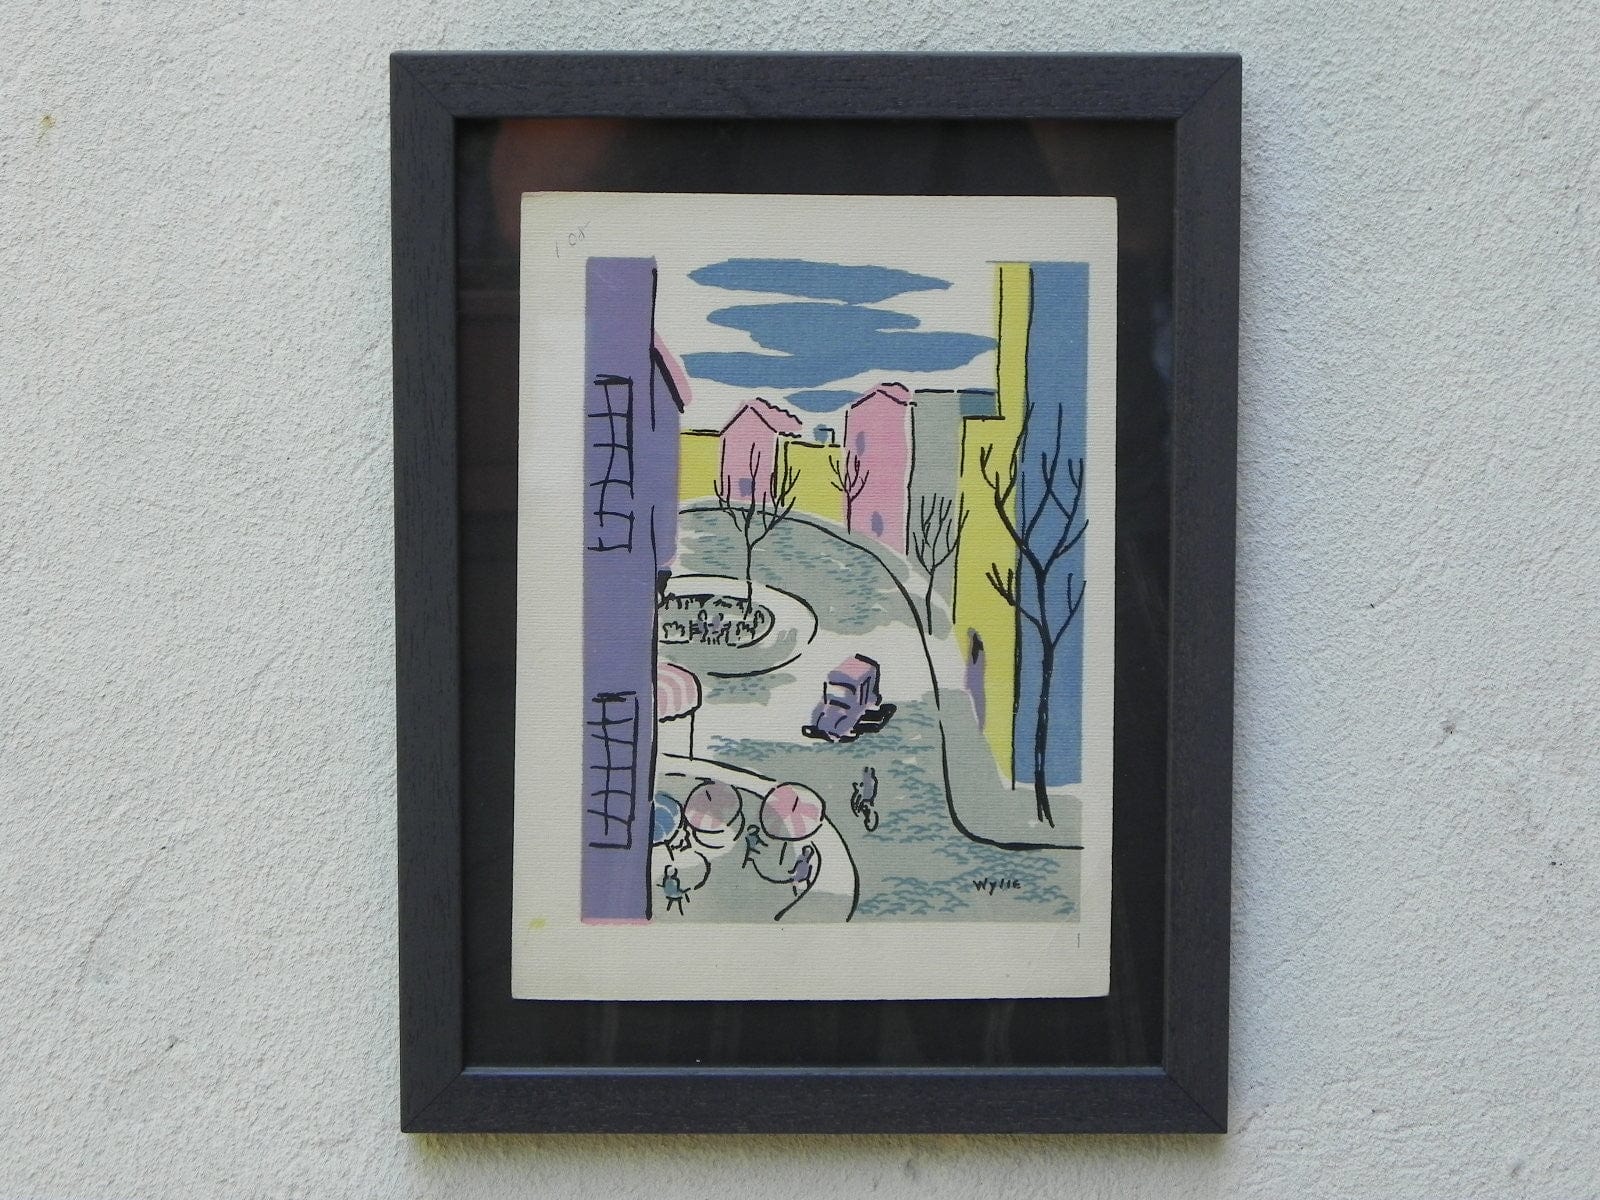 I Like Mike's Mid Century Modern Wall Decor & Art Mid-Century Lithograph by Wylie Newly Framed-Street Scene with Café, Bicycle & Truck, Pastel Colors